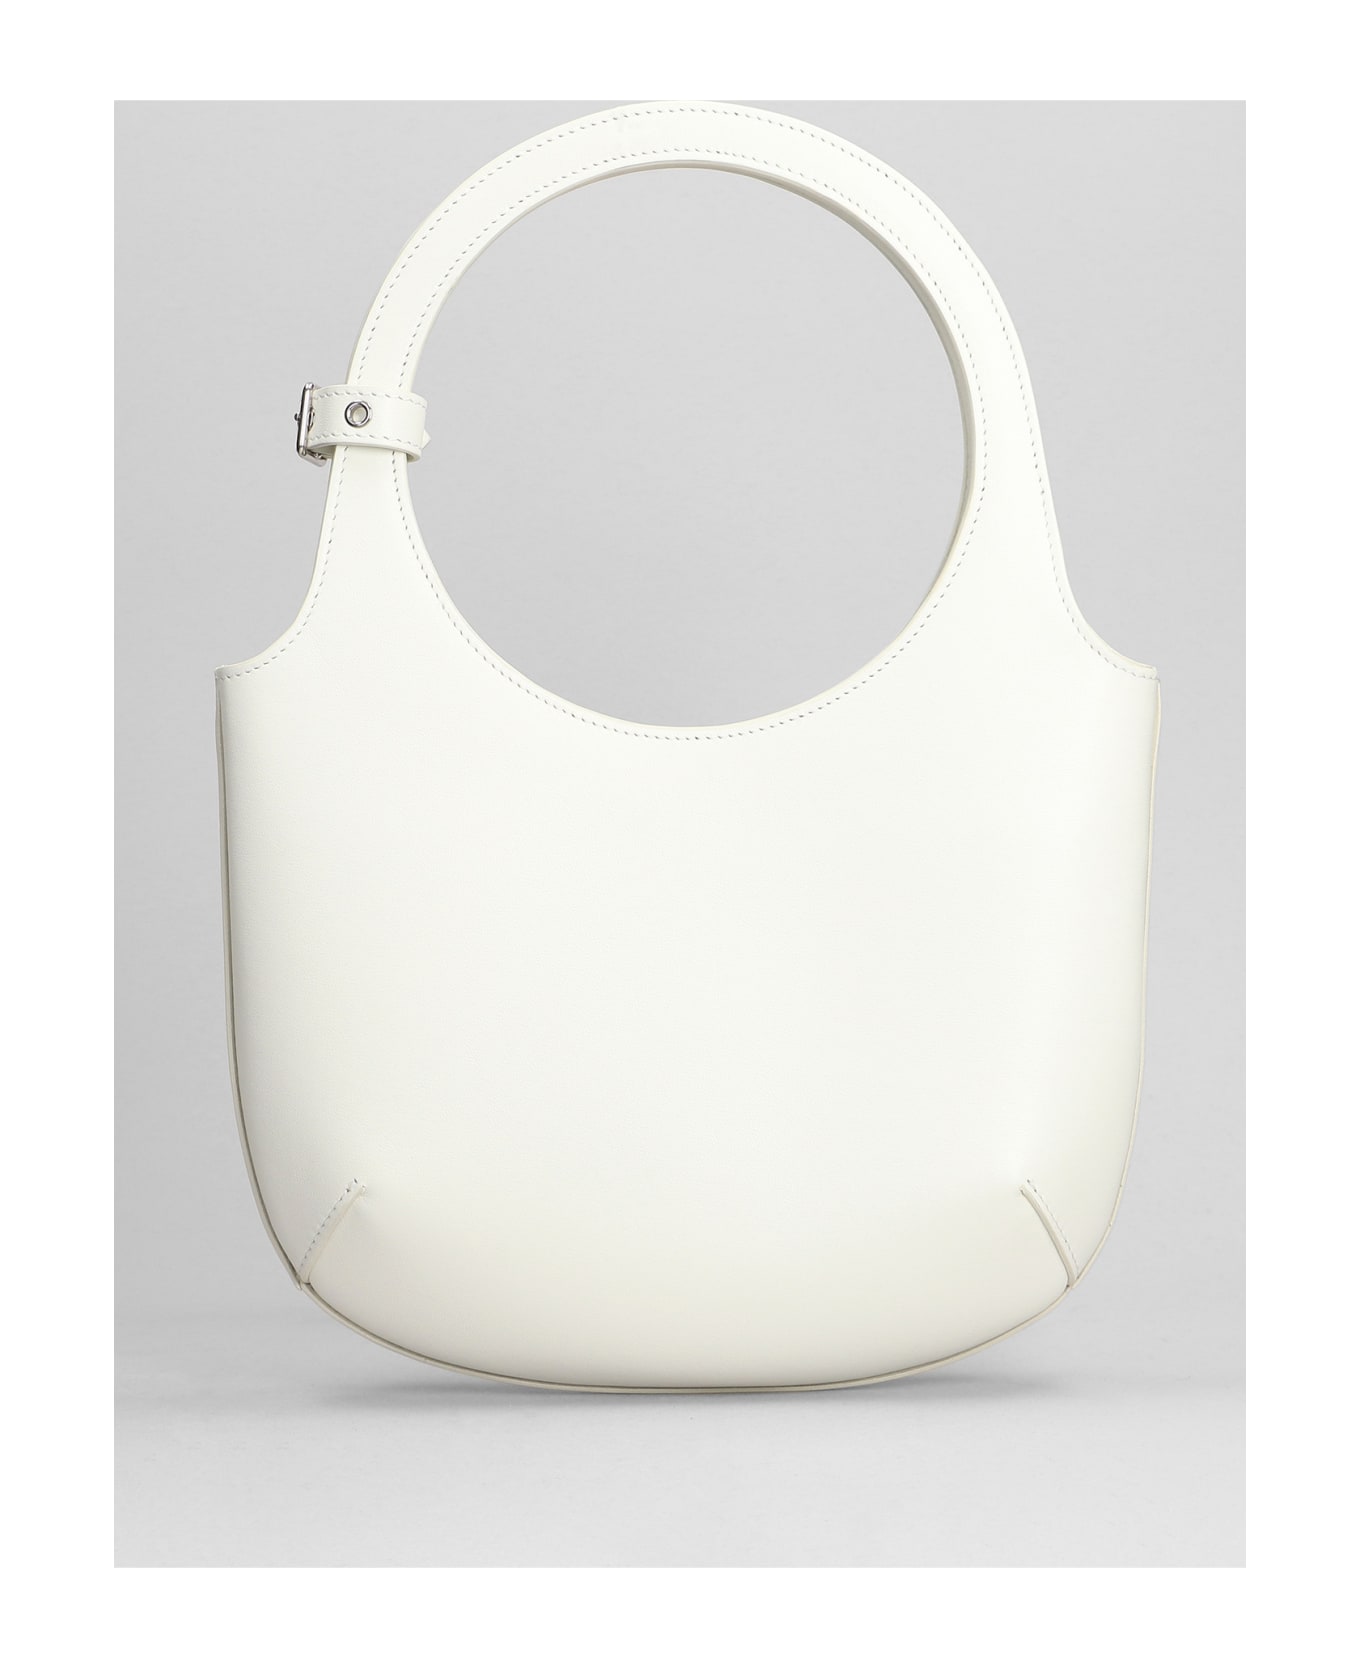 Courrèges Shoulder Bag In White Leather - white トートバッグ